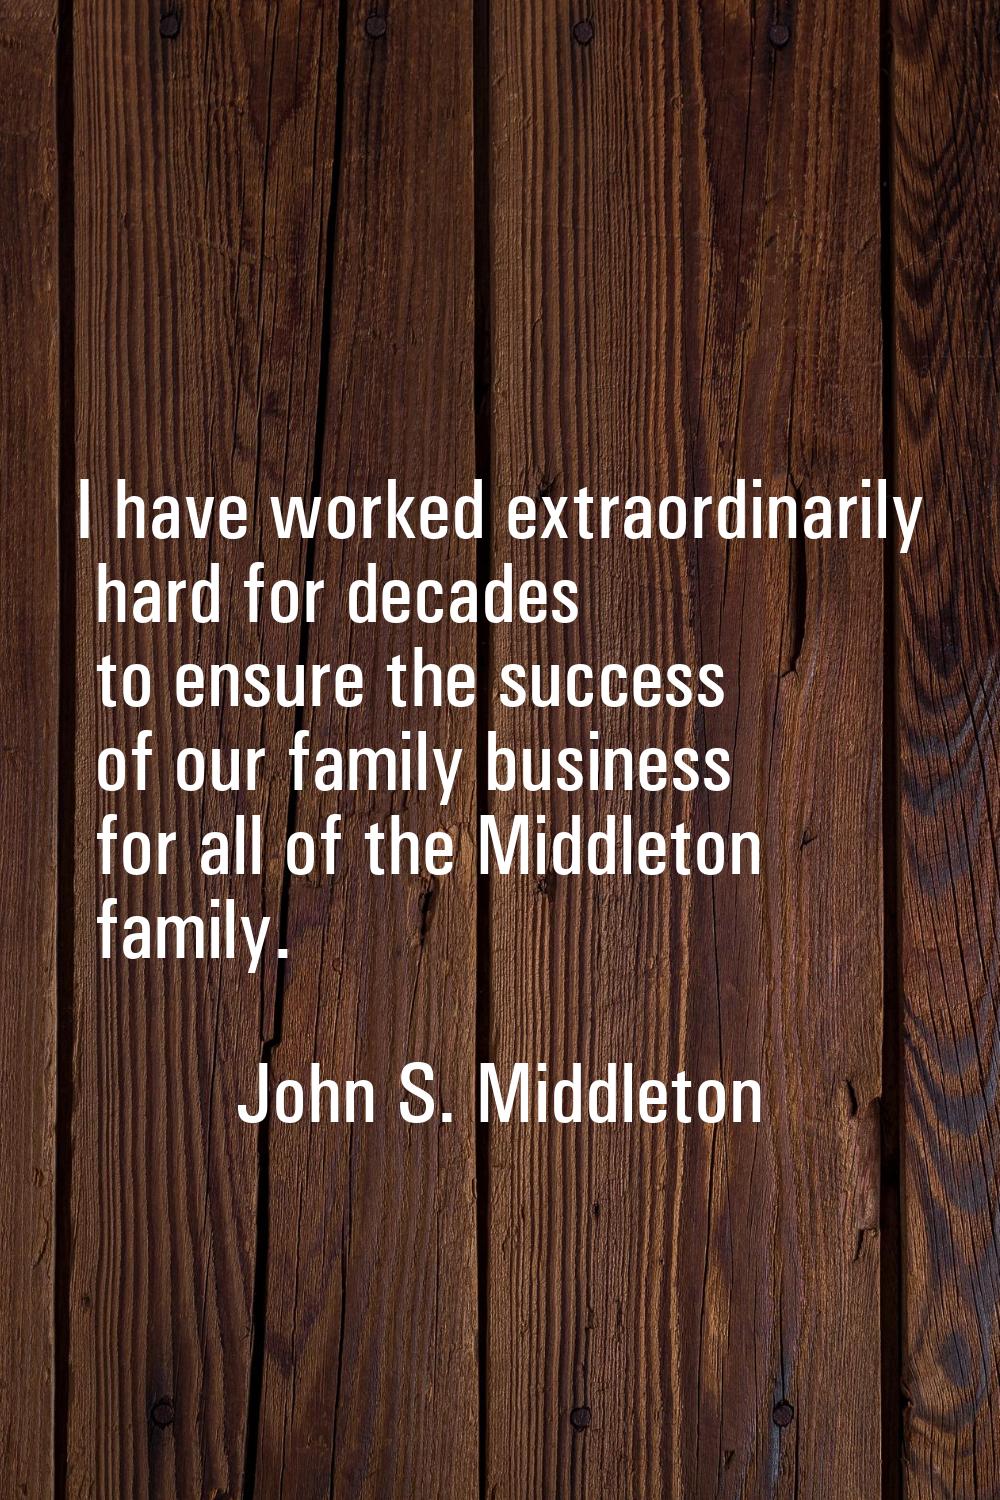 I have worked extraordinarily hard for decades to ensure the success of our family business for all